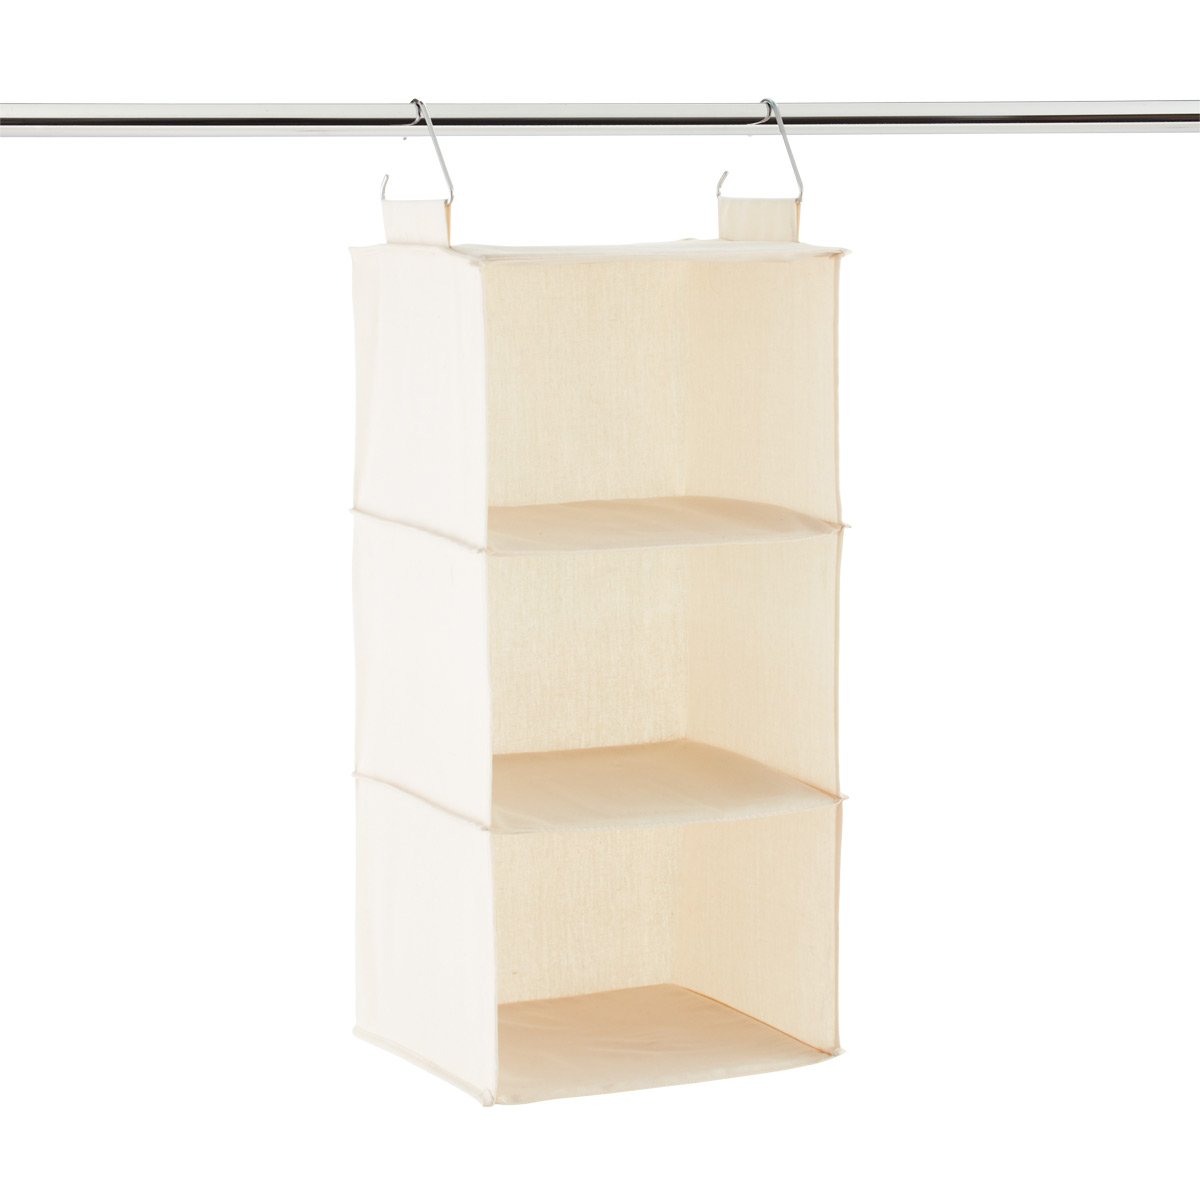 https://images.containerstore.com/catalogimages/314407/10071573-hanging-canvas-organizer-3-.jpg